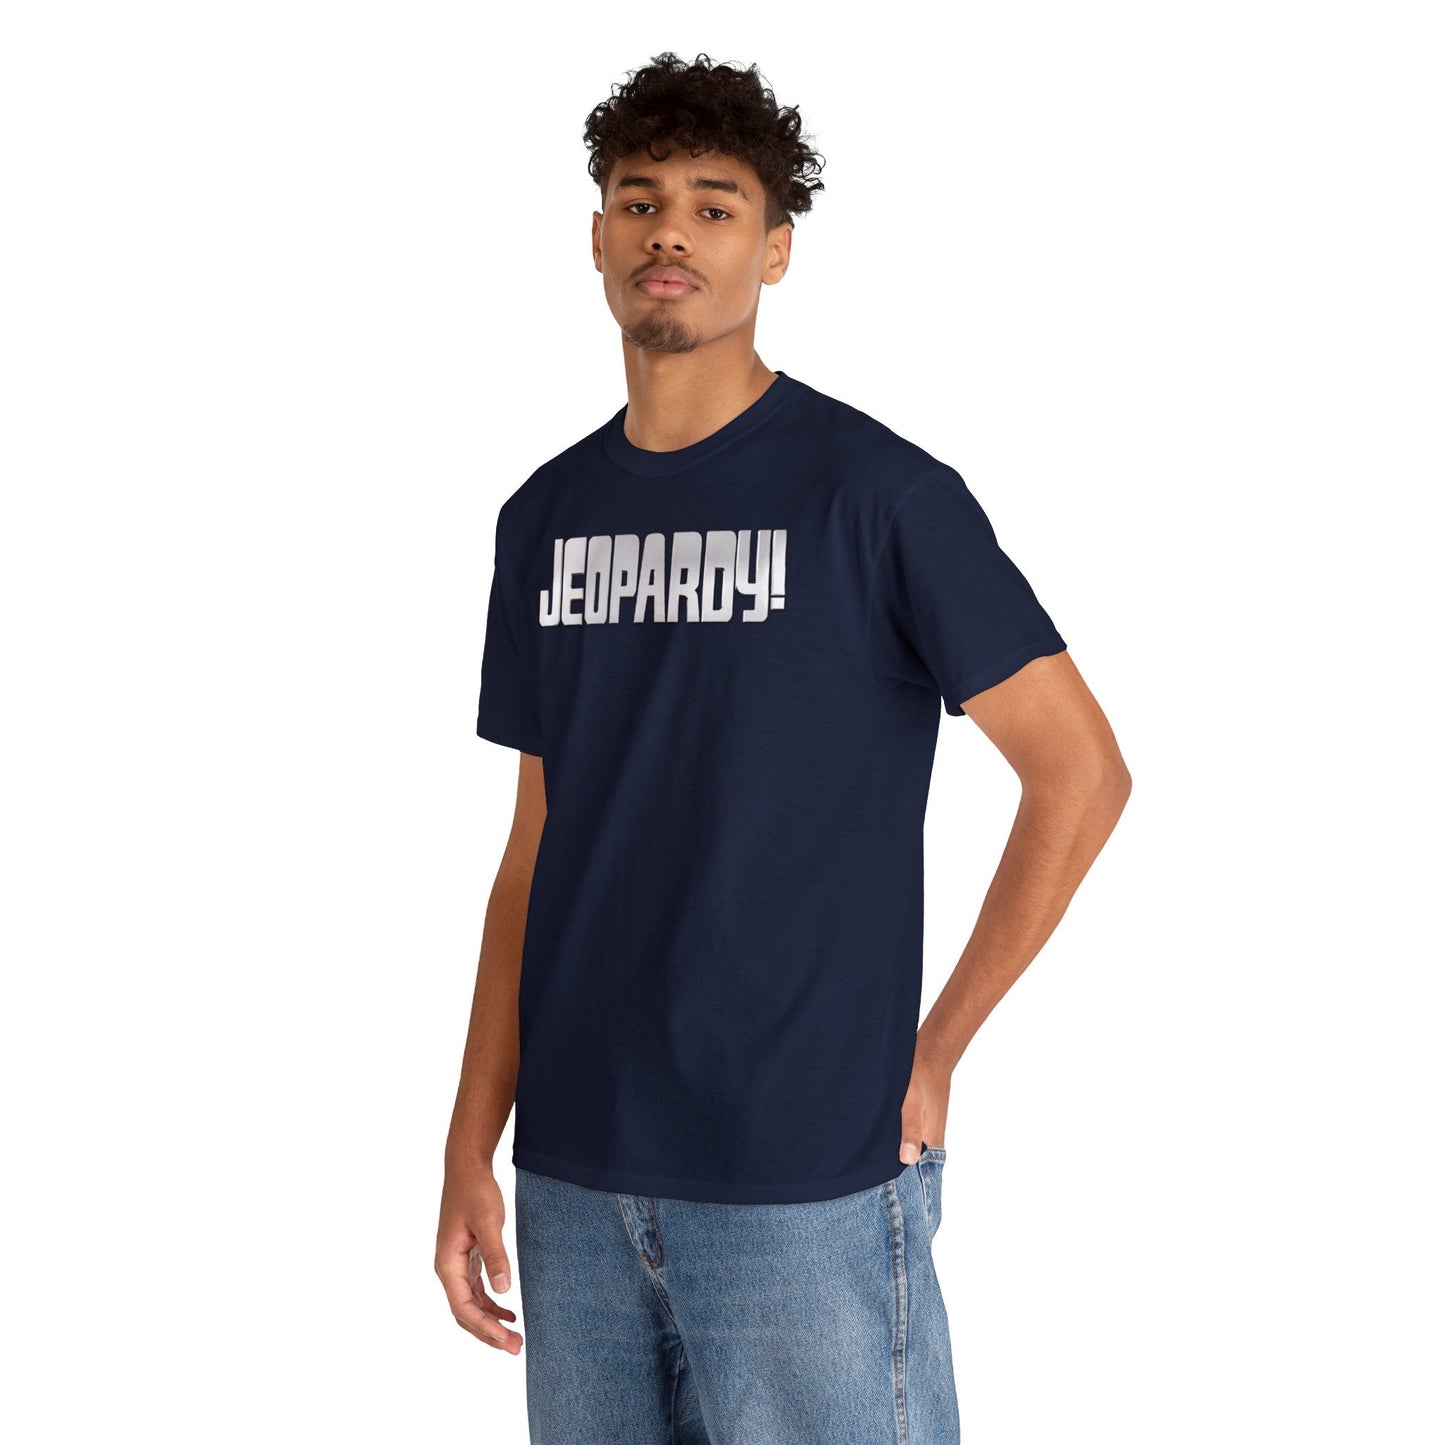 Jeopardy Game Show T-Shirt